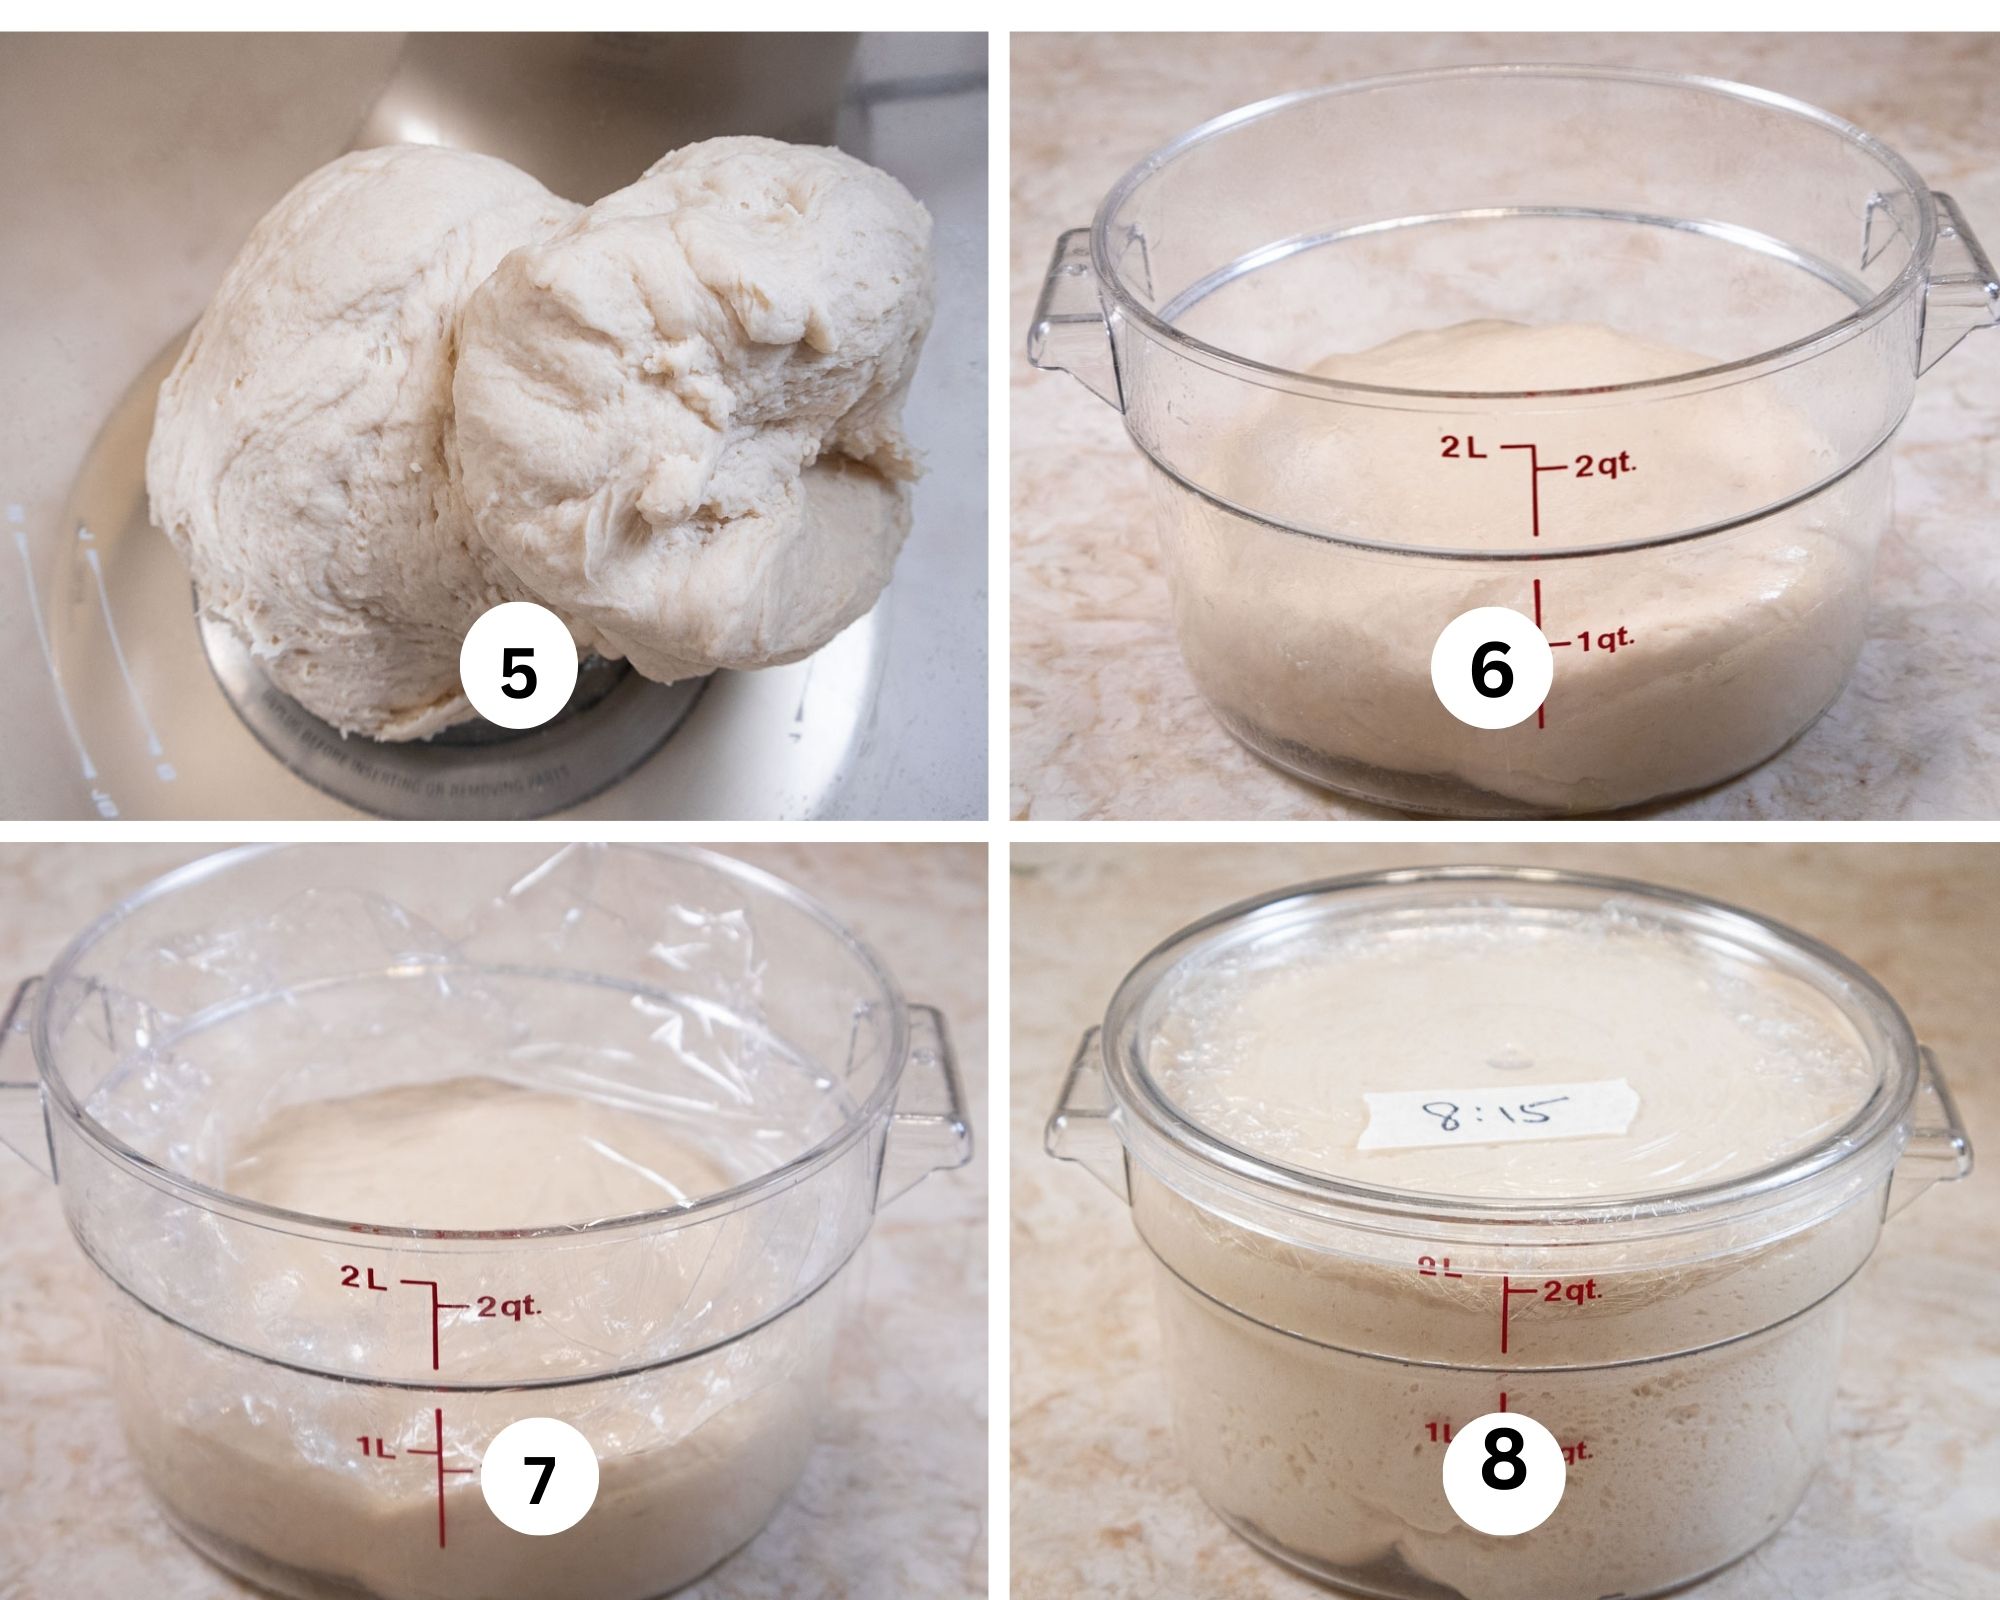 The second collage shows the dough made in the bowl, in a rising container, and covered.